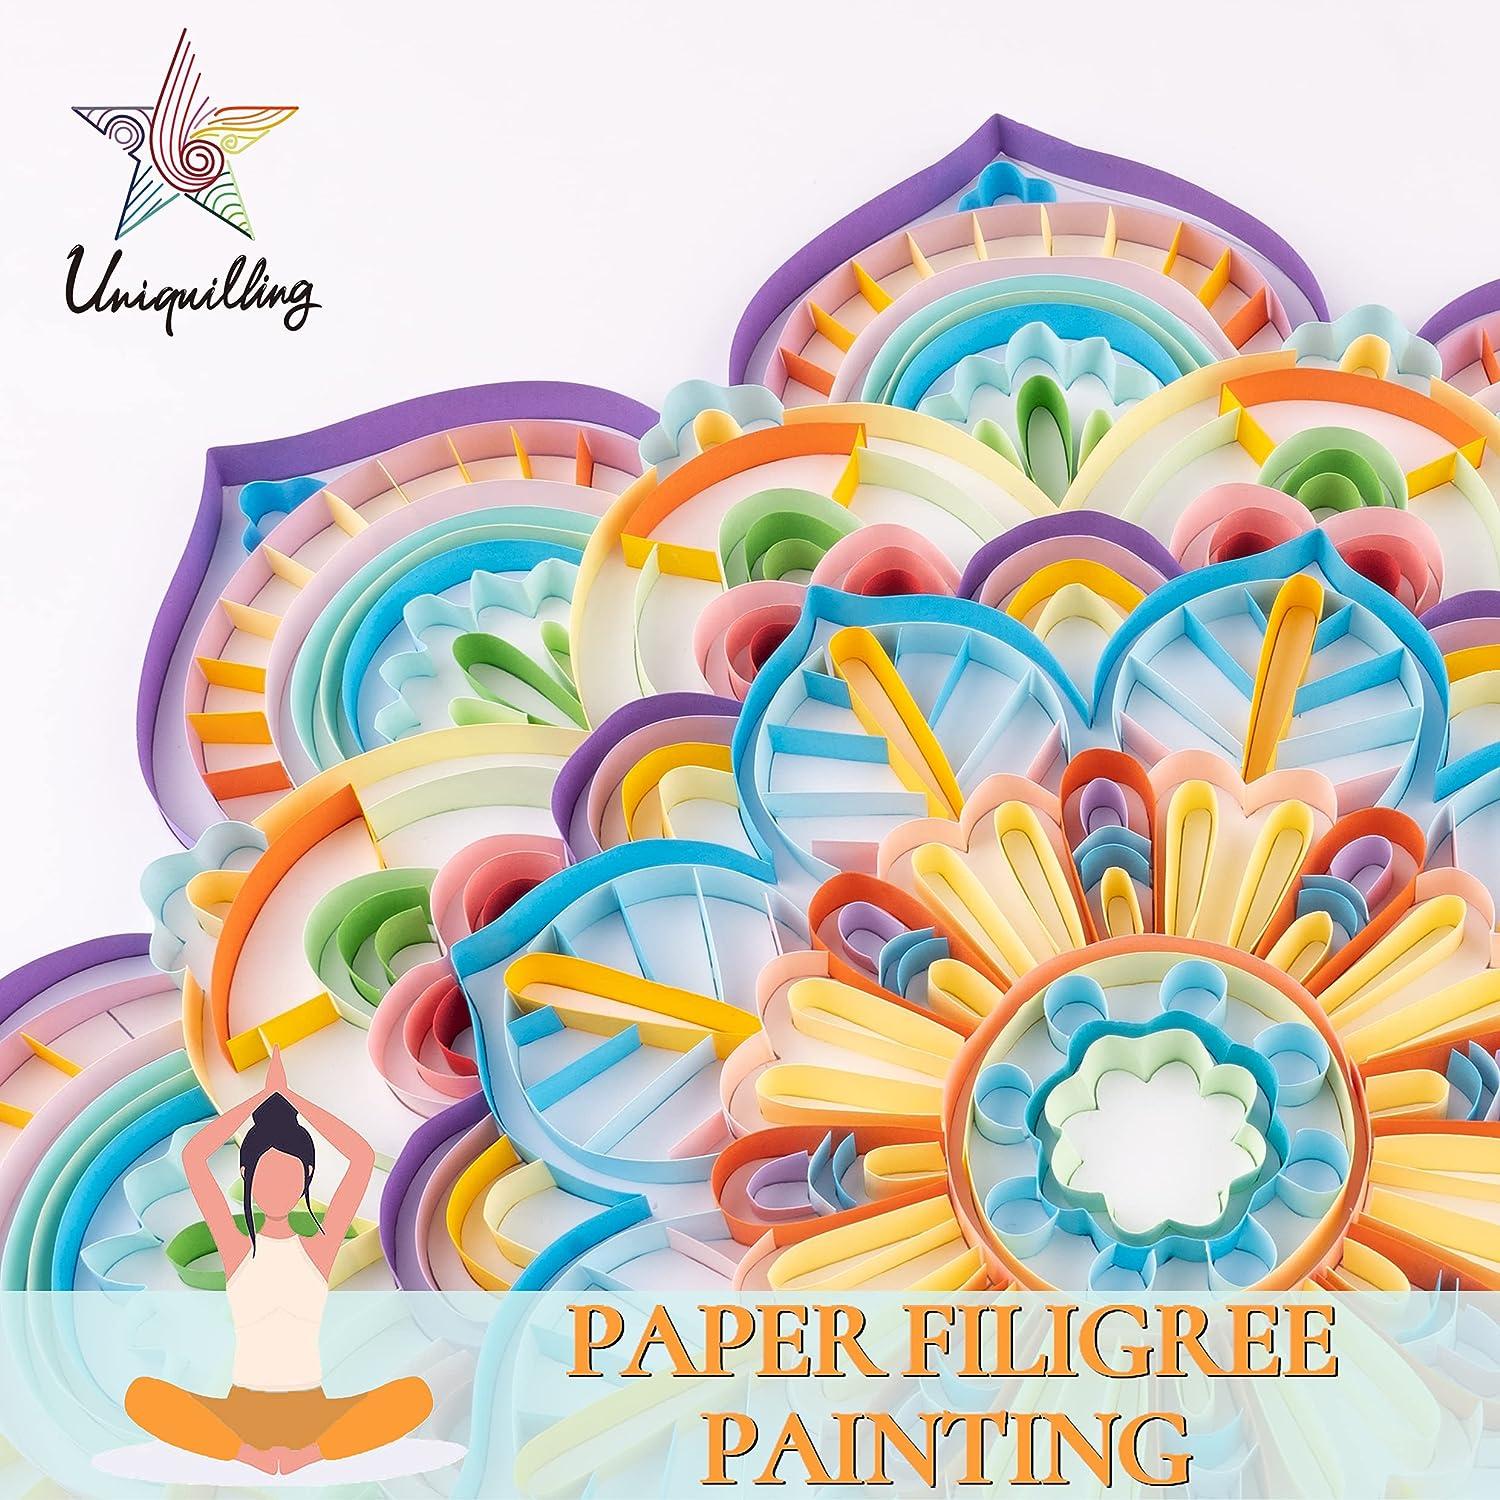 Uniquilling Quilling Paper Quilling Kit for Adults Beginner 16